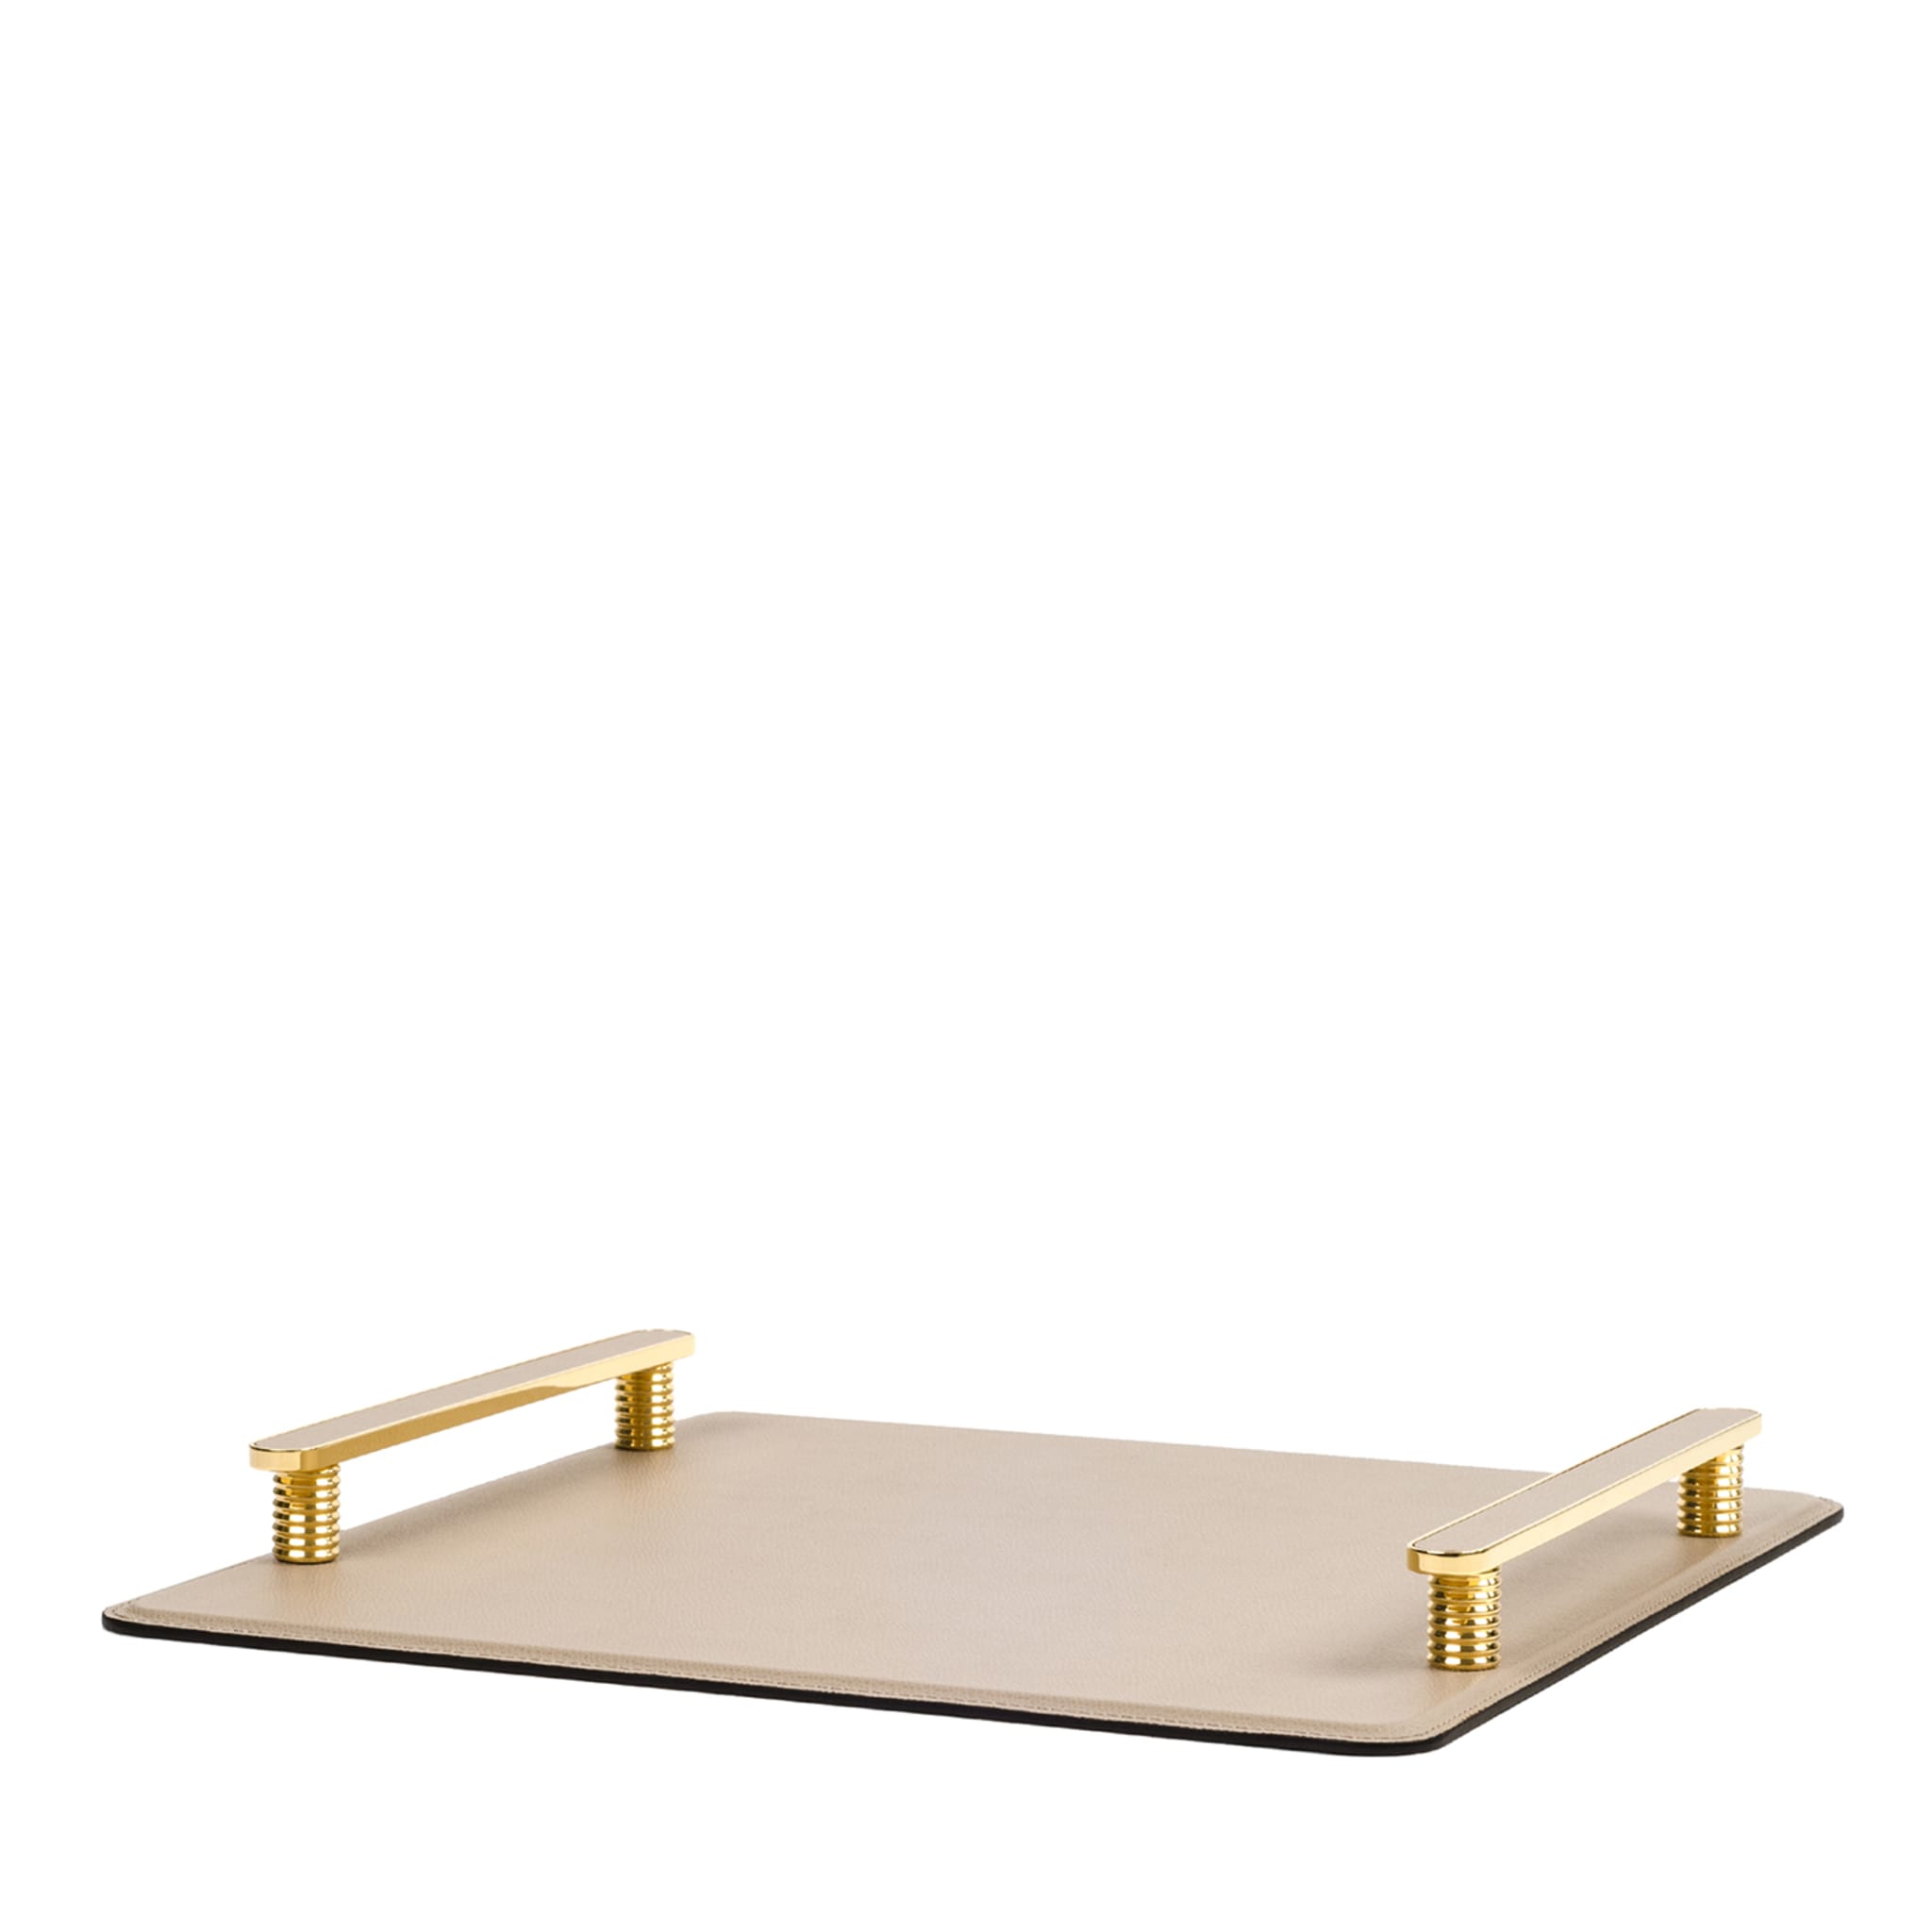 Venaria Square Gold/Beige Leather Tray - Main view